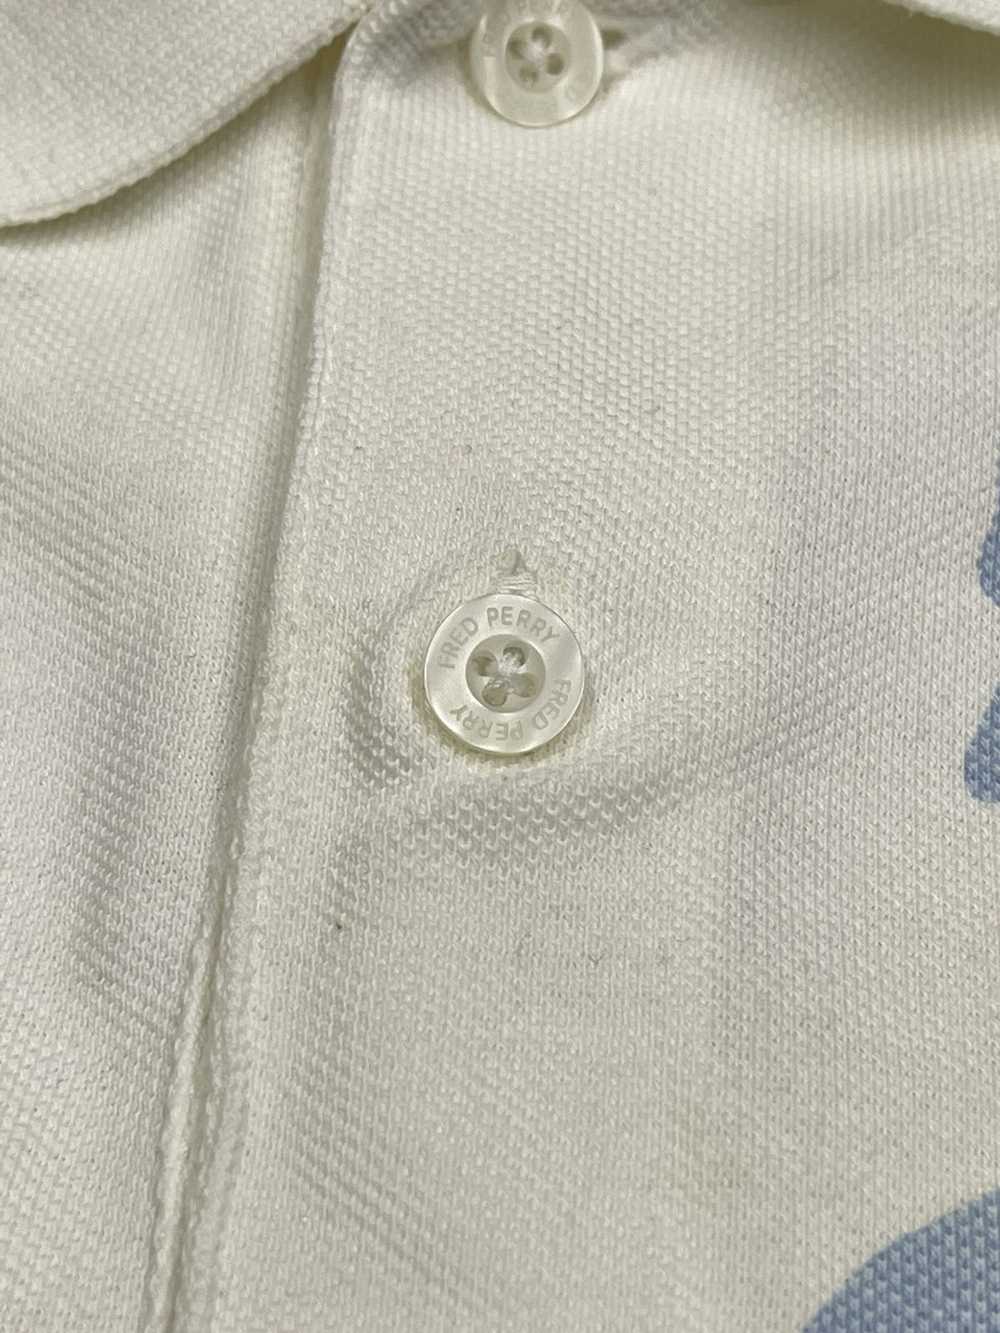 Fred Perry × Rare × Vintage Rare Vintage Fred Per… - image 7